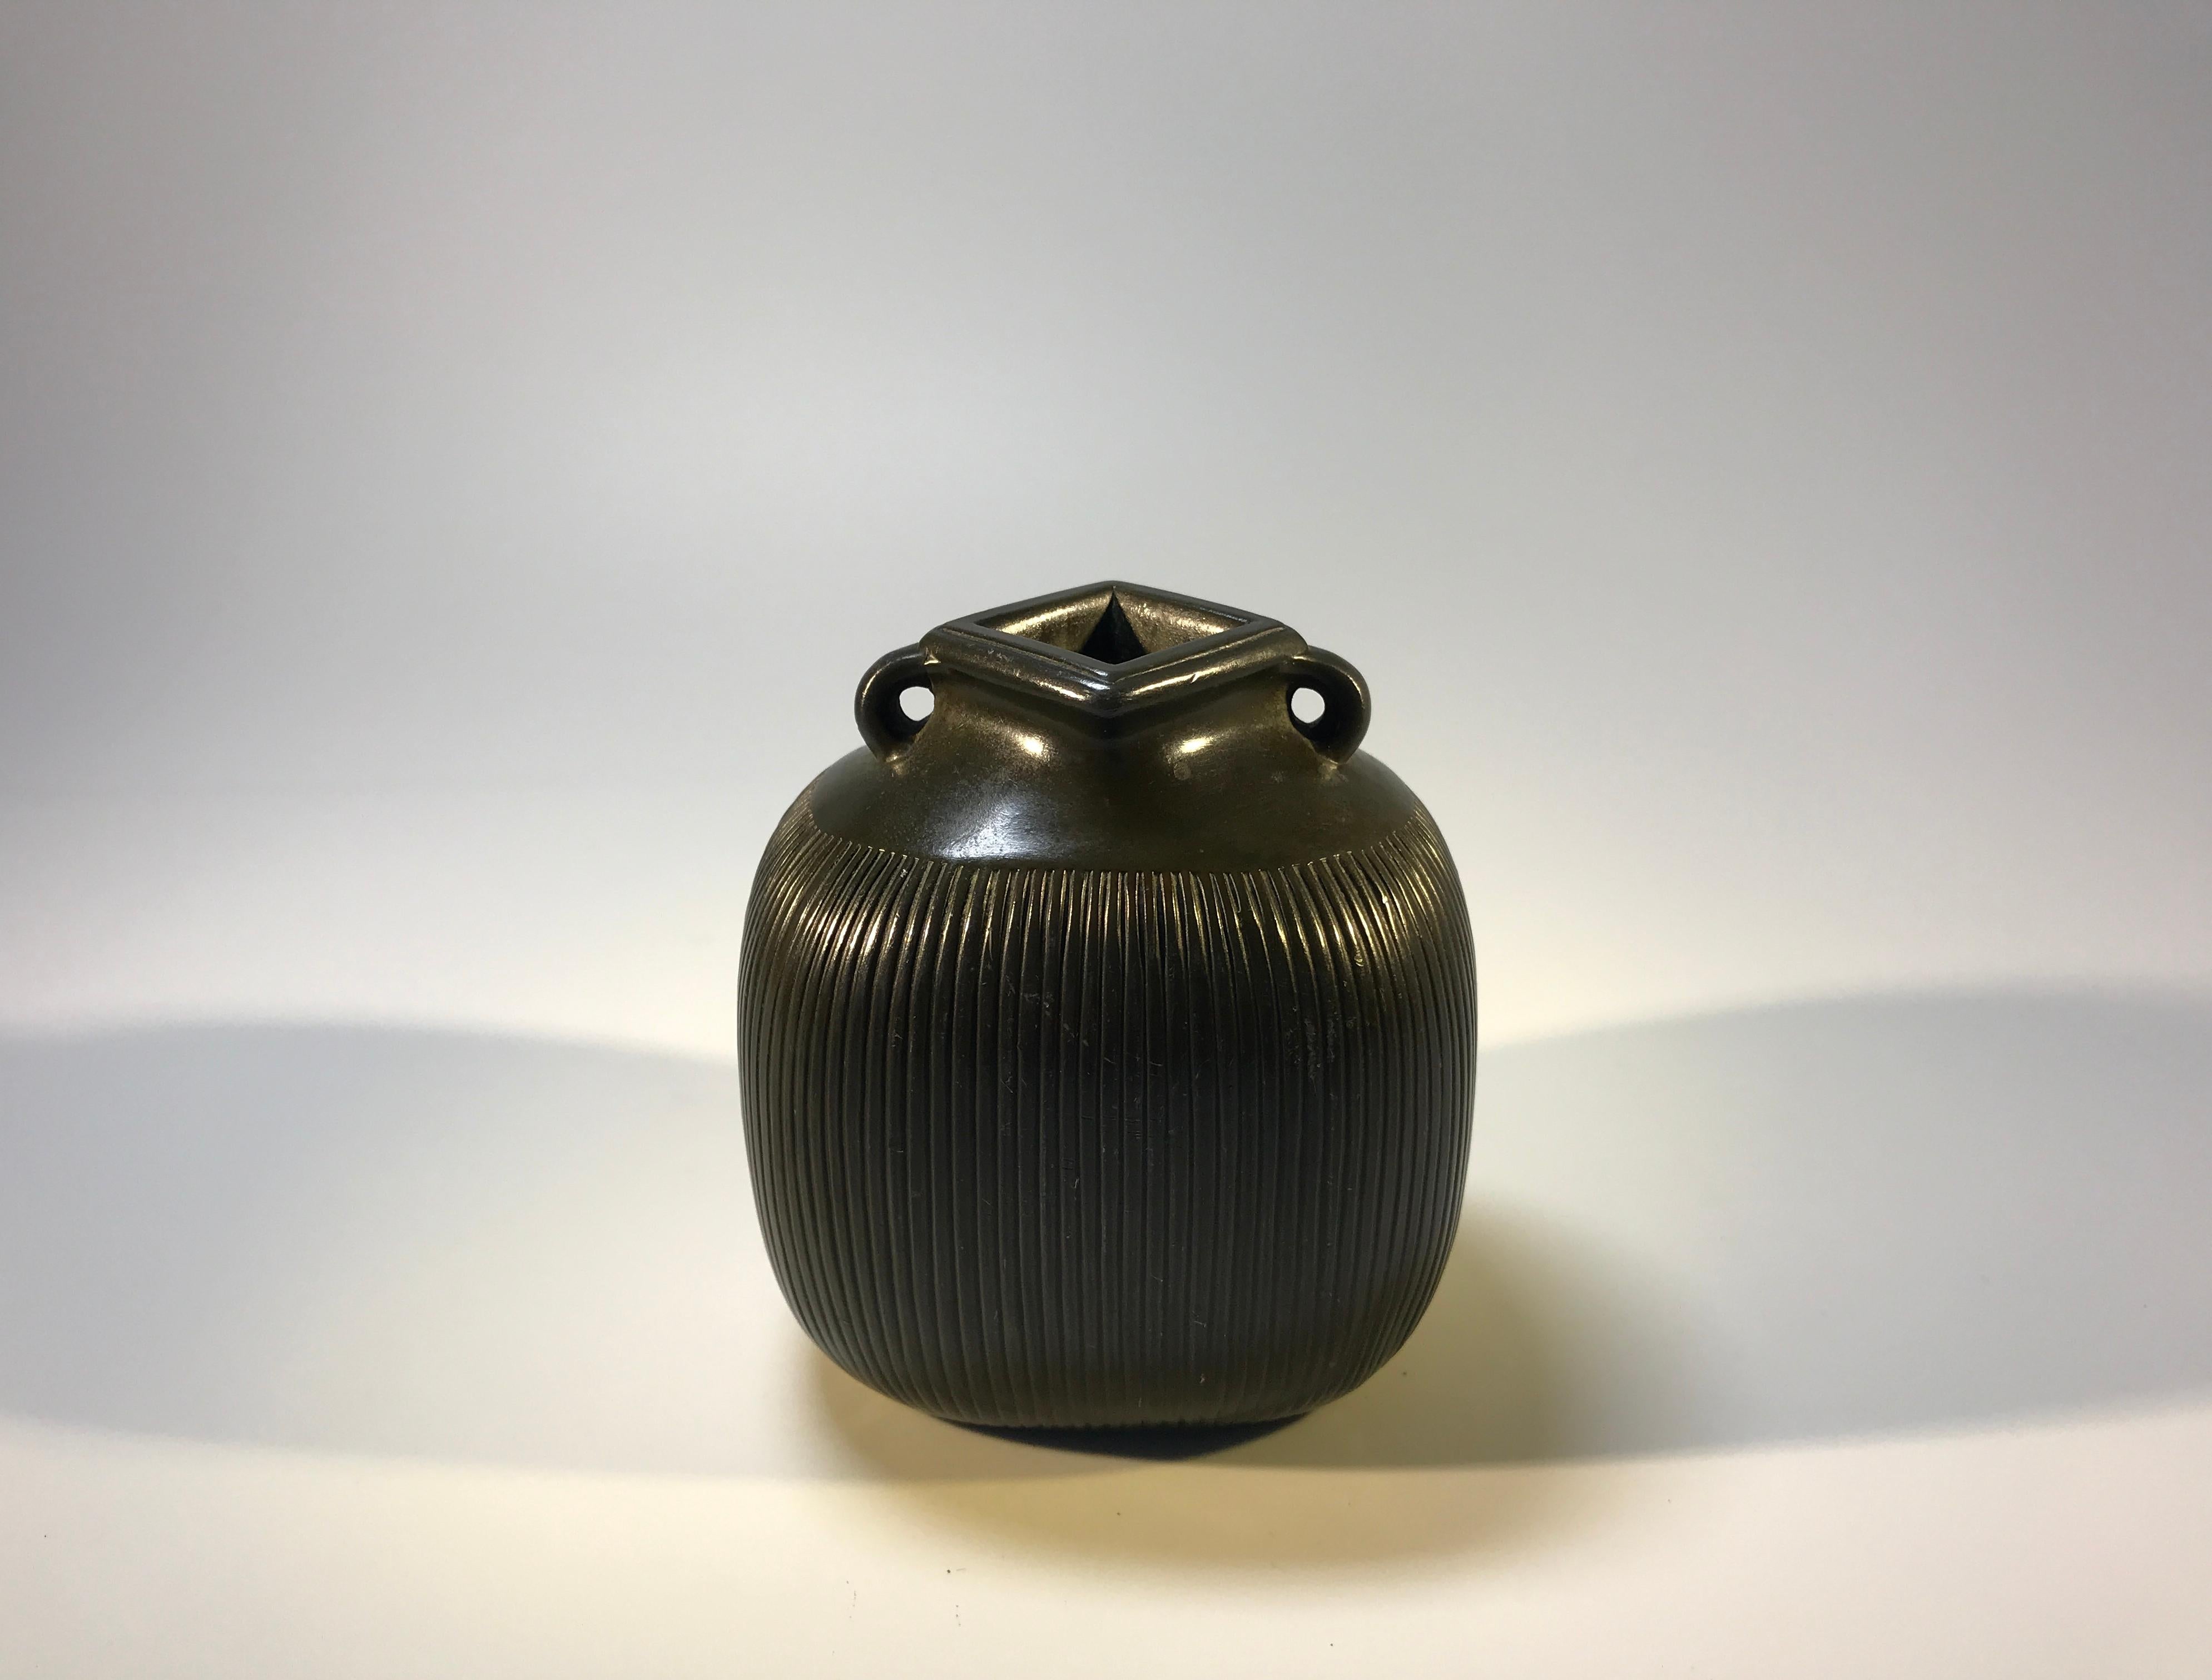 Impressive Just Andersen of Denmark small ribbed vase with an uncommon square neck and twin handles. It has a superb dark patina and is made in Disko metal - a metal specifically invented by Just Andersen by combining lead and antimony
This is a